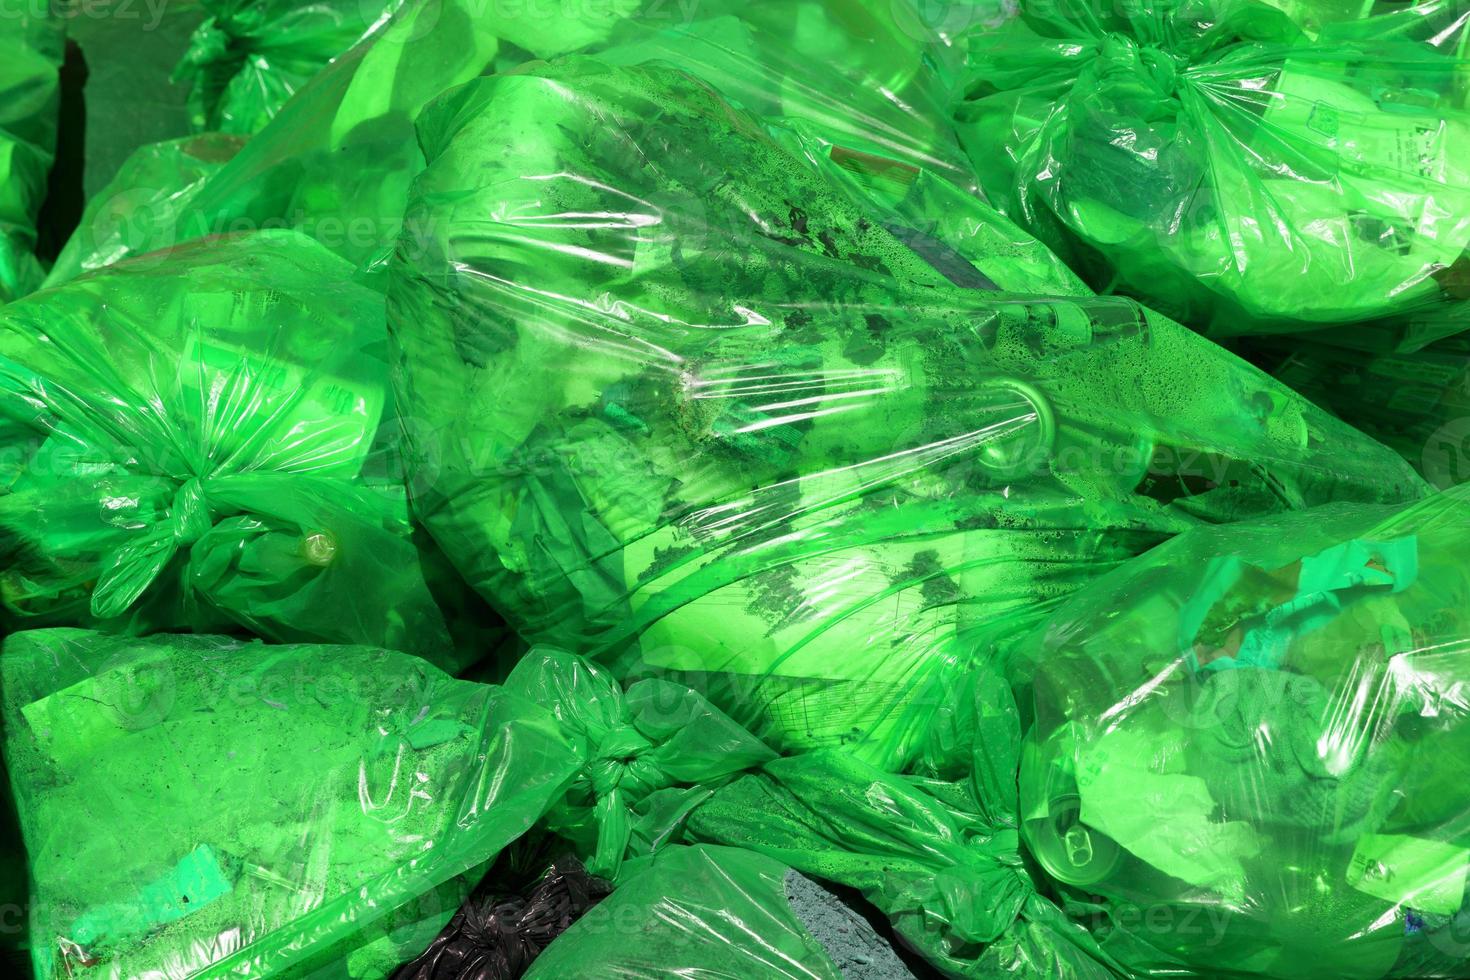 https://static.vecteezy.com/system/resources/previews/012/627/016/non_2x/full-frame-background-of-green-plastic-trash-bags-with-generic-domestic-waste-photo.jpg